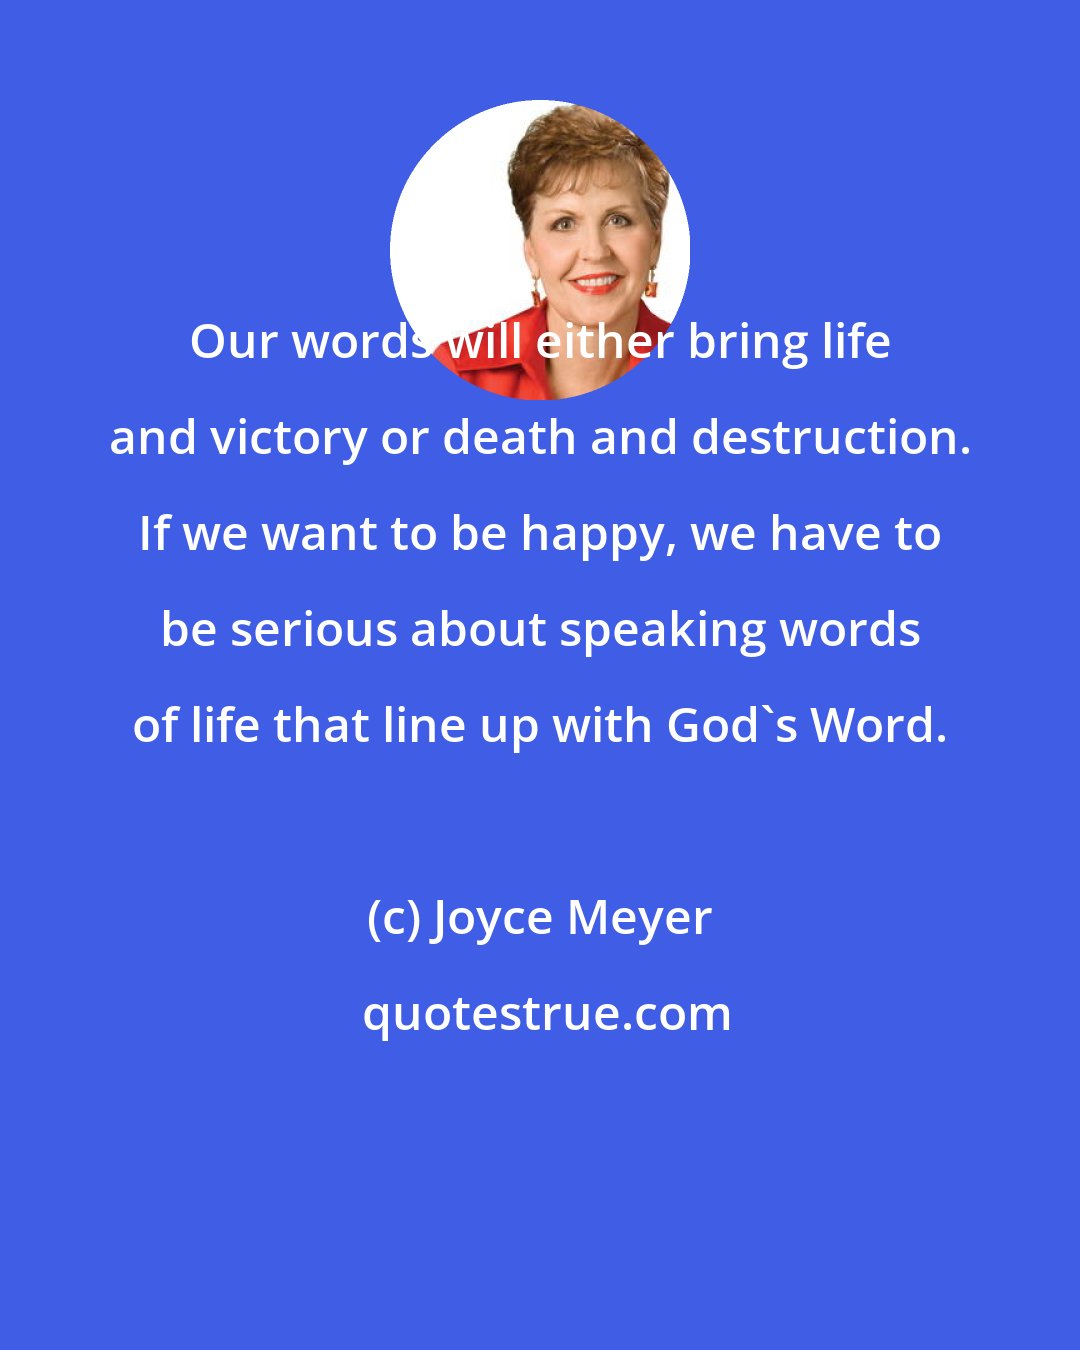 Joyce Meyer: Our words will either bring life and victory or death and destruction. If we want to be happy, we have to be serious about speaking words of life that line up with God's Word.